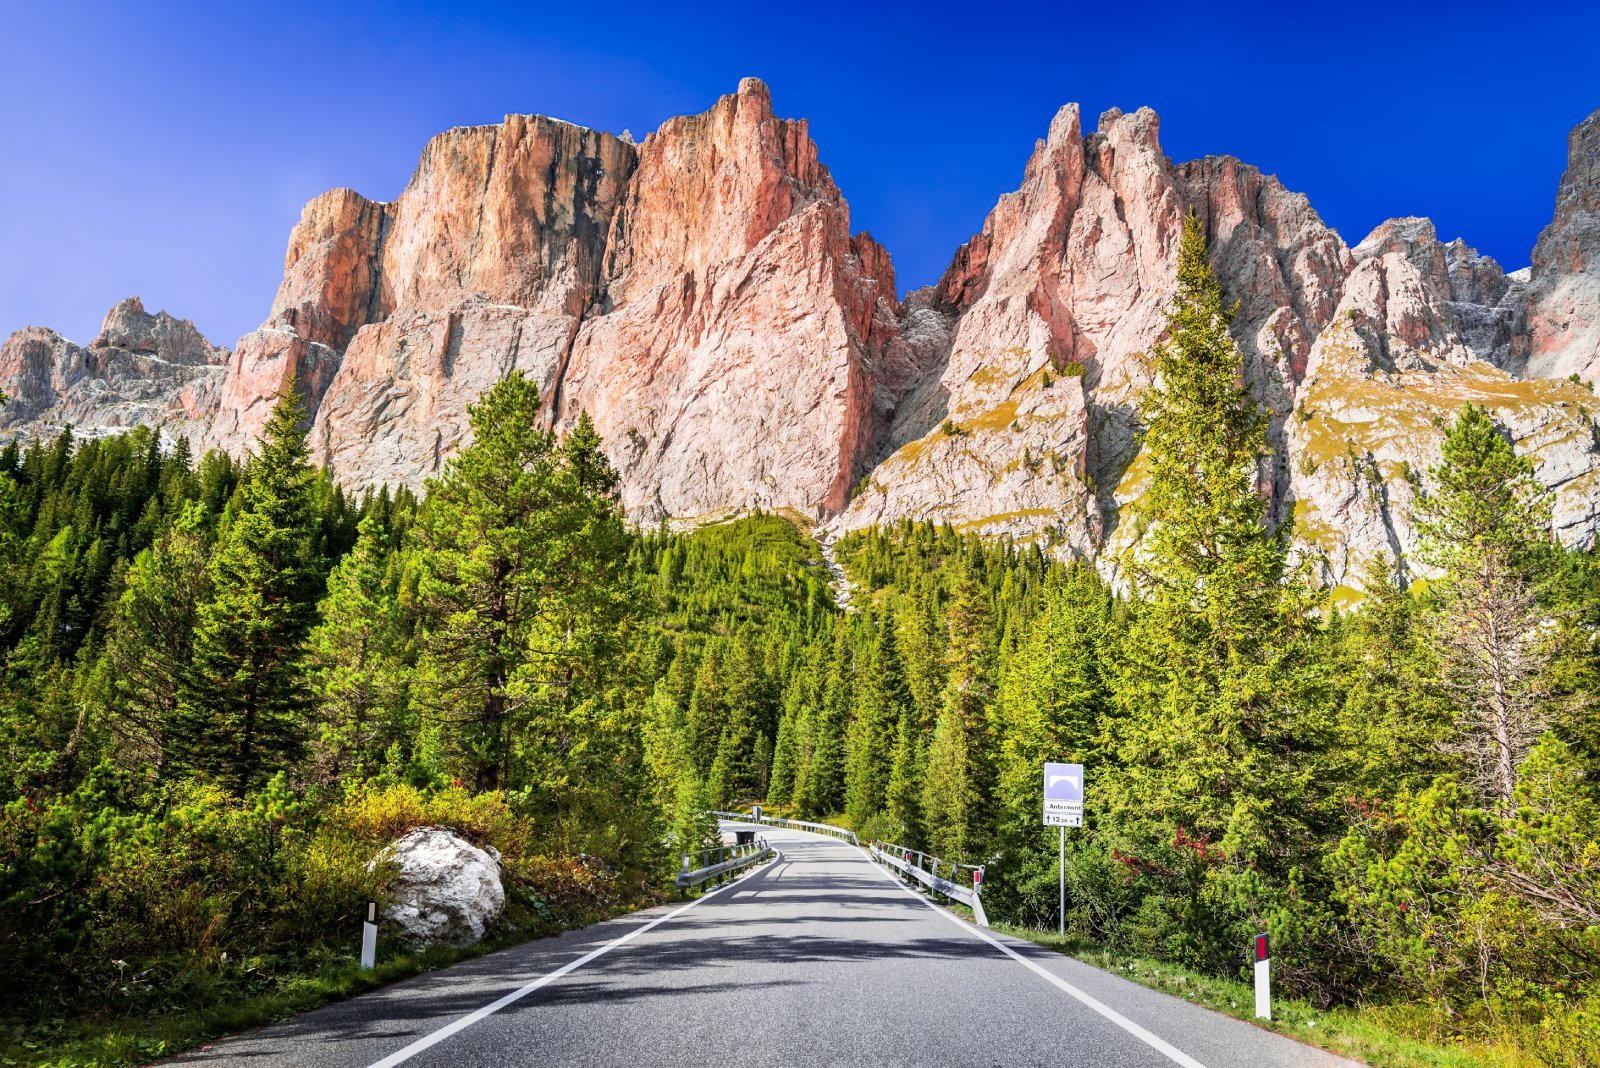 <p class="wp-caption-text">Image Credit: Shutterstock / ecstk22</p>  <p><span>The Sella Ronda, a circular ski route around the massif of the Sella group, is one of the most spectacular skiing experiences in the world. It connects four Ladin valleys – Val Gardena, Alta Badia, Val di Fassa, and Arabba – and can be completed in one day. The route offers diverse scenery and ski runs, suitable for intermediate skiers. In summer, the Sella Ronda becomes a challenging route for cyclists and a scenic drive for motorists.</span></p>